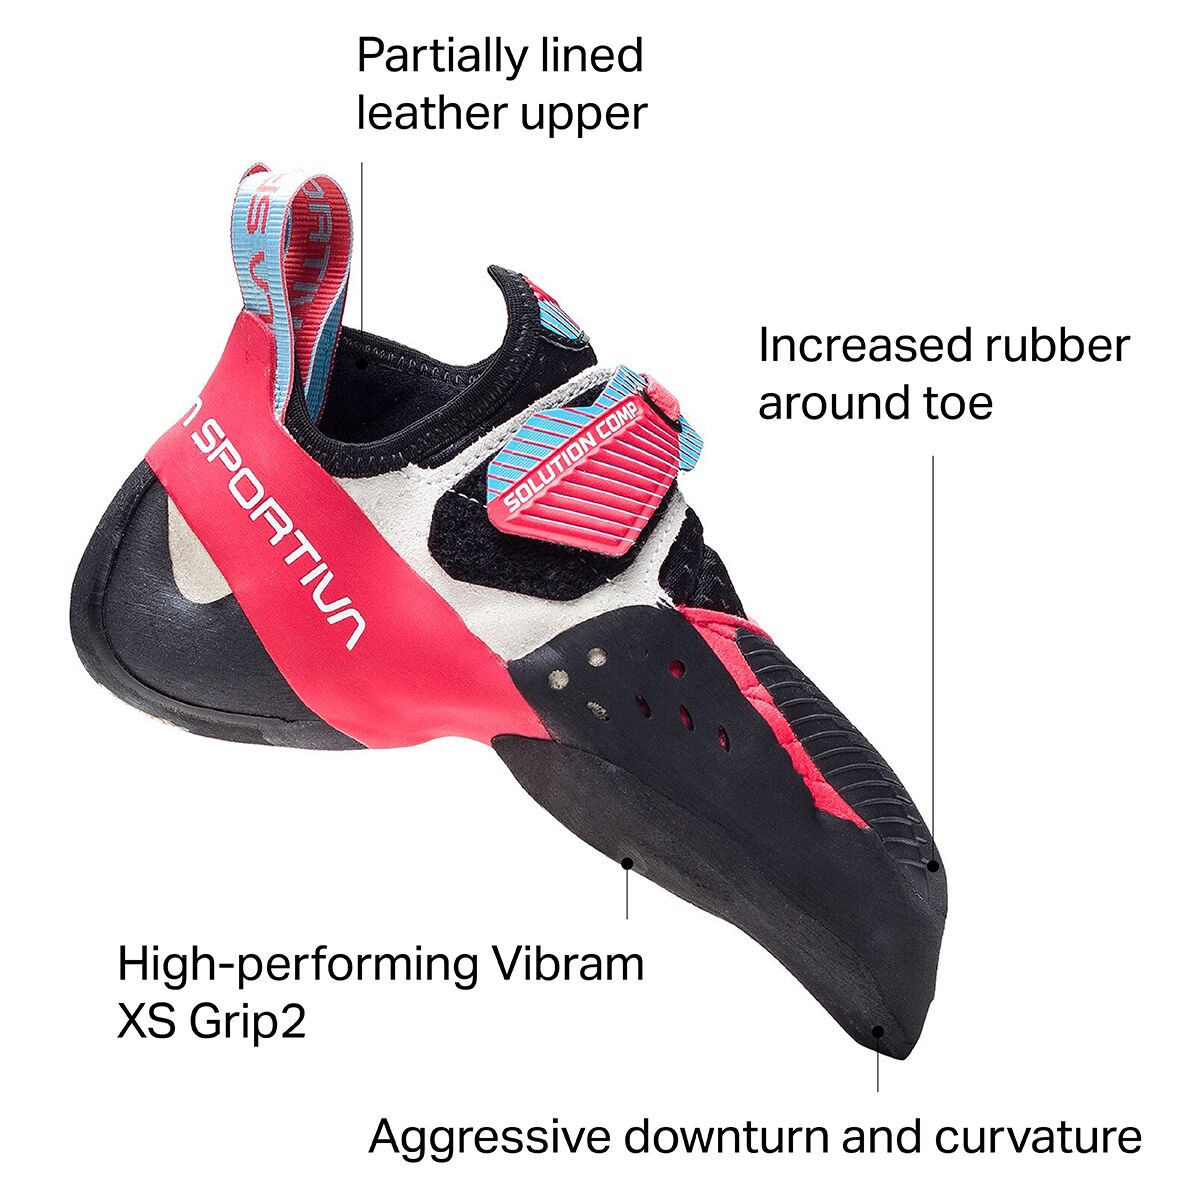  SCARPA Drago LV Rock Climbing Shoes for Sport Climbing and  Bouldering - Low-Volume Fit and Specialized Performance for Sensitivity -  White - 4.5